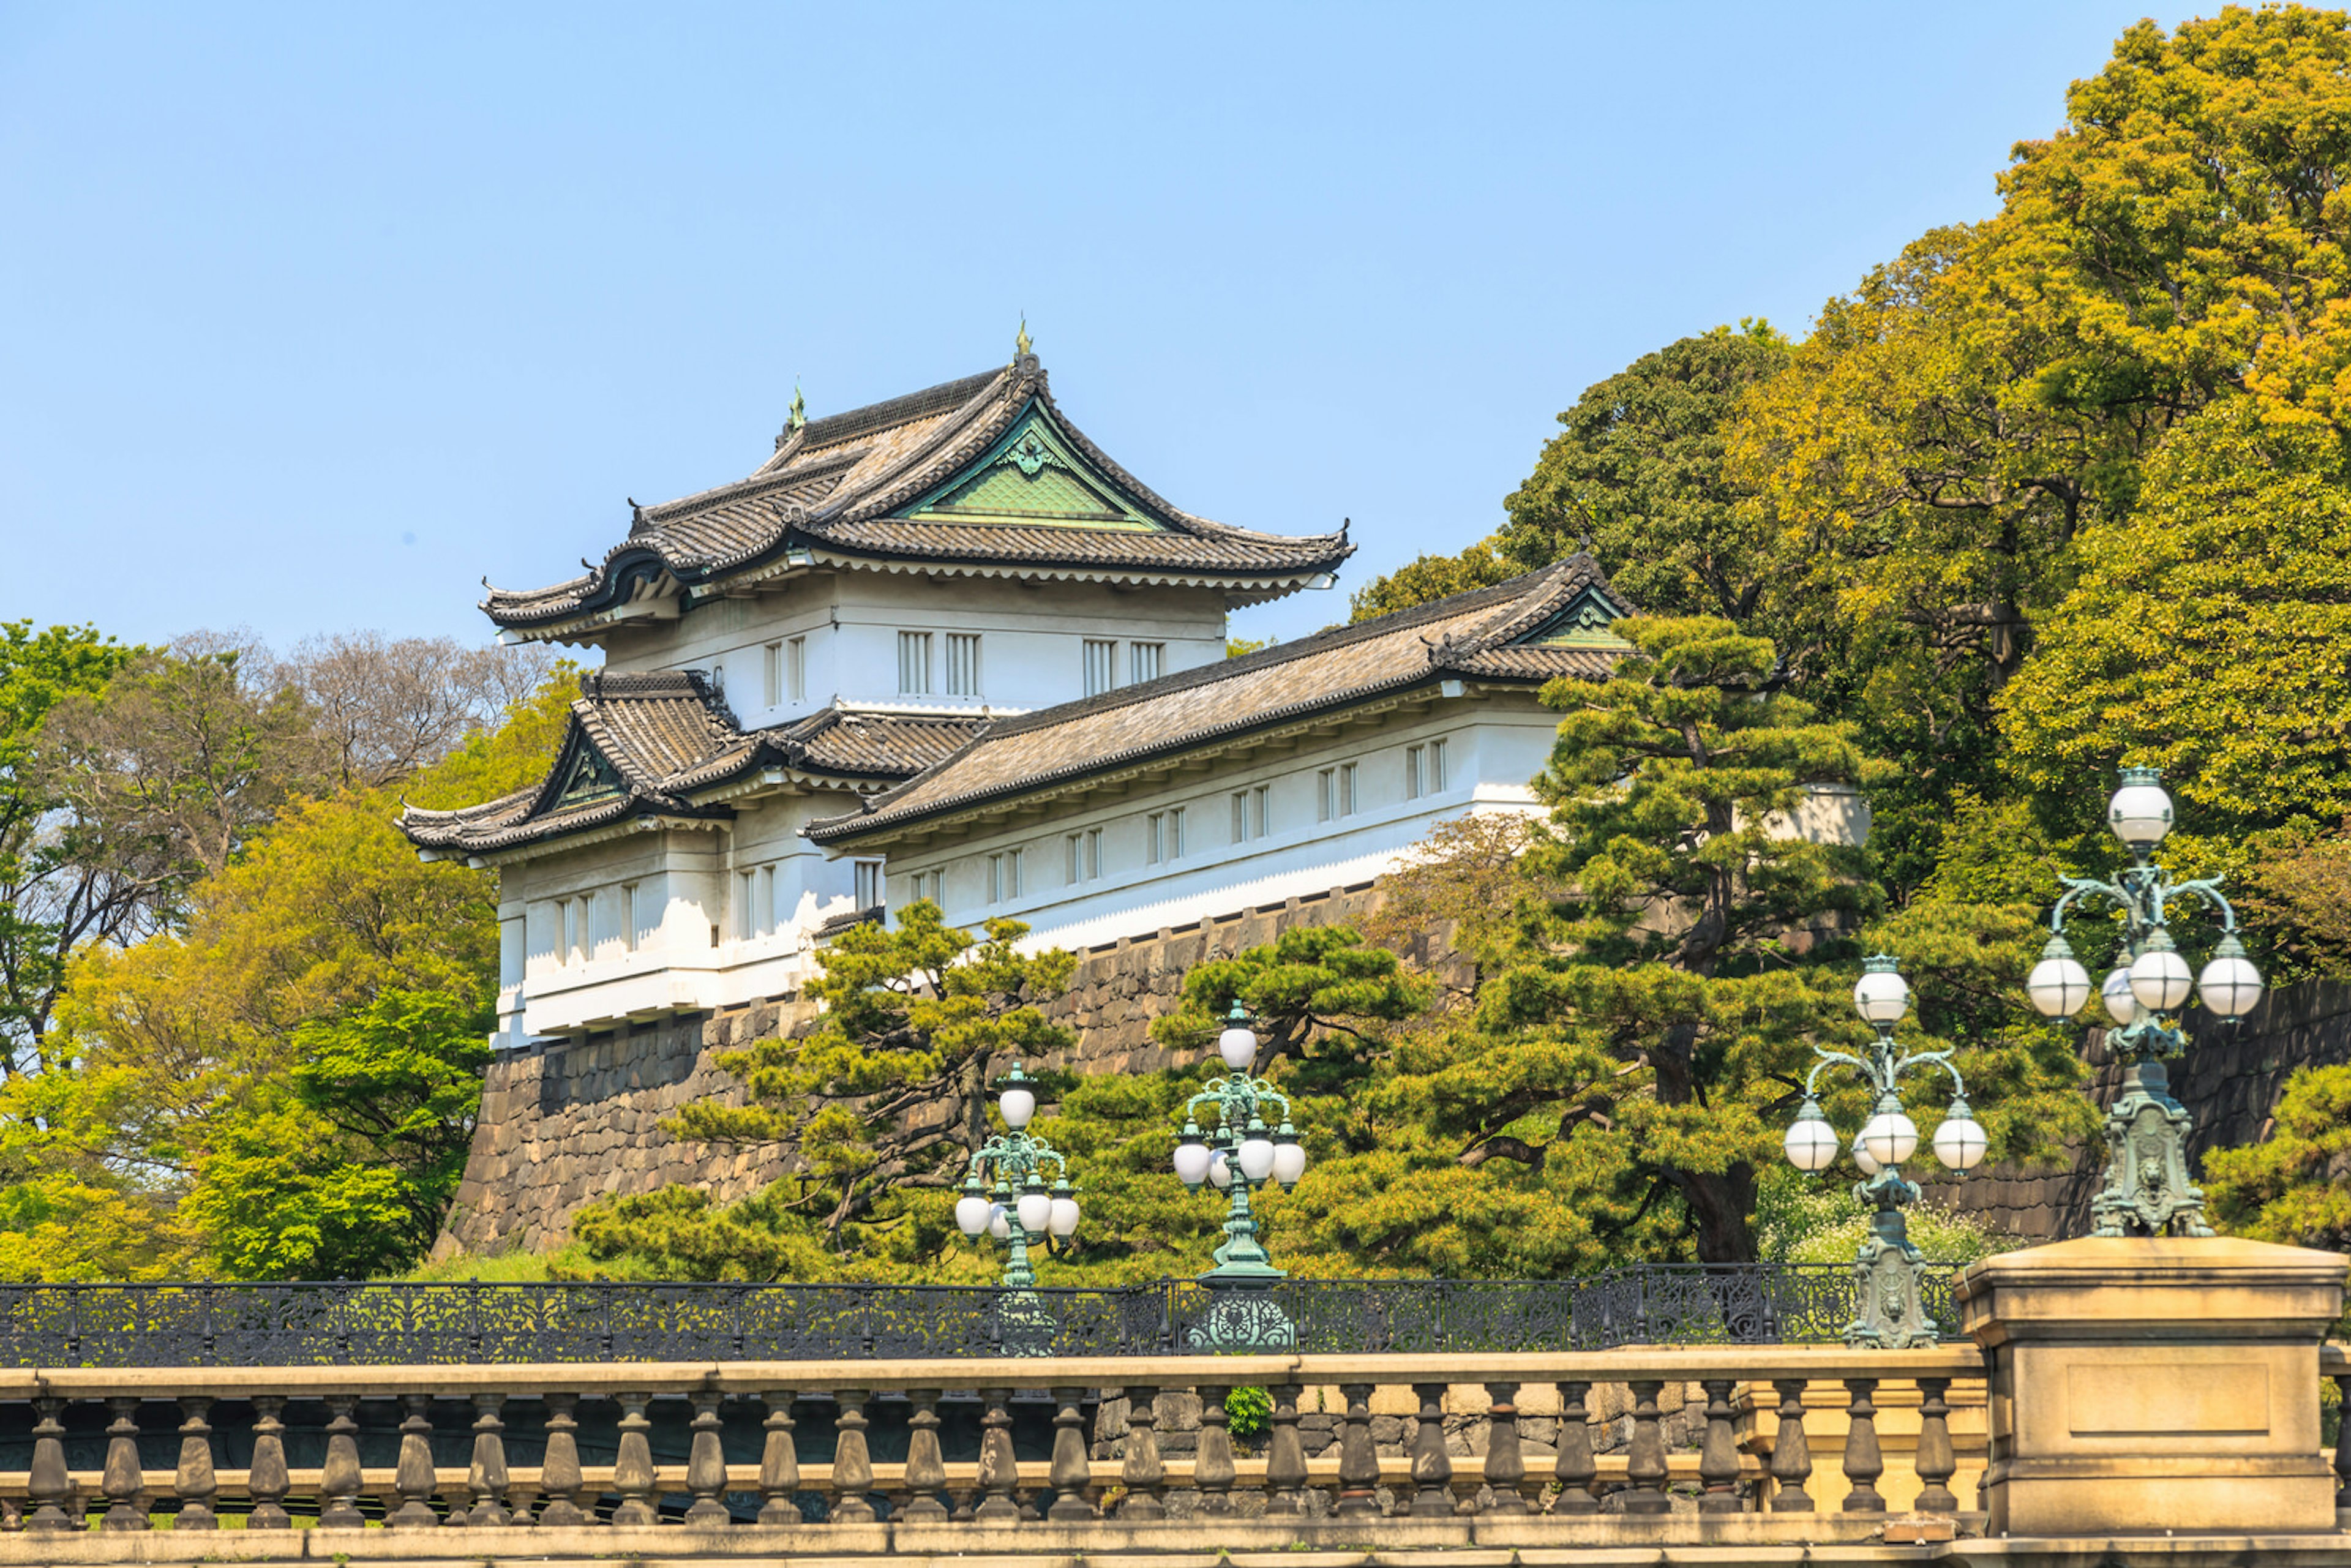 With trees on either side and a balustrade in front, the Imperial Palace in Tokyo, Japan, stands beneath a blue sky, painted white with ornate eaves